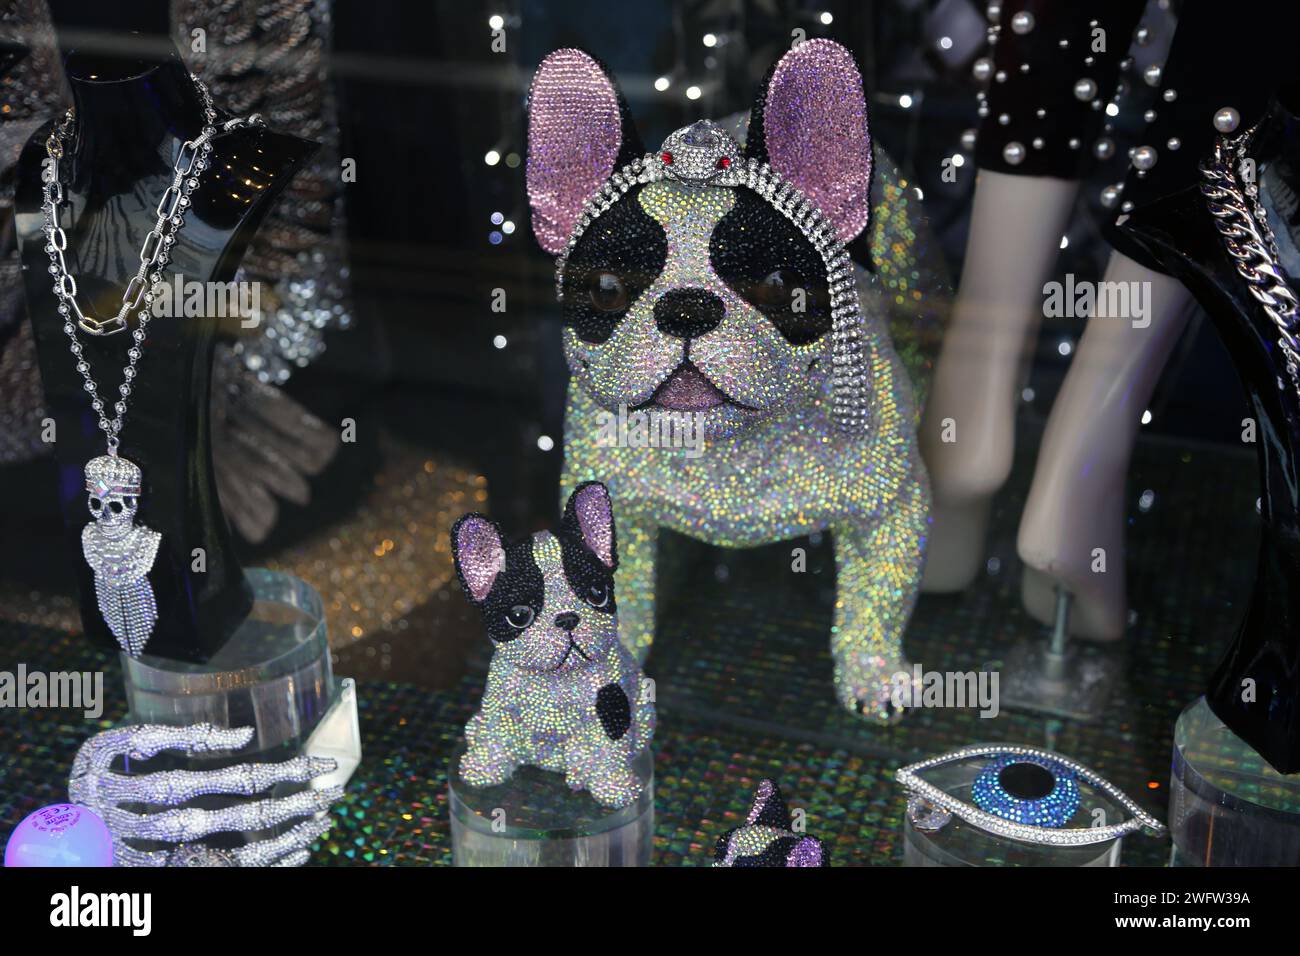 Bejeweled French Bulldog Ornaments and Jewellery in Shop Window Chelsea Londra Inghilterra Foto Stock